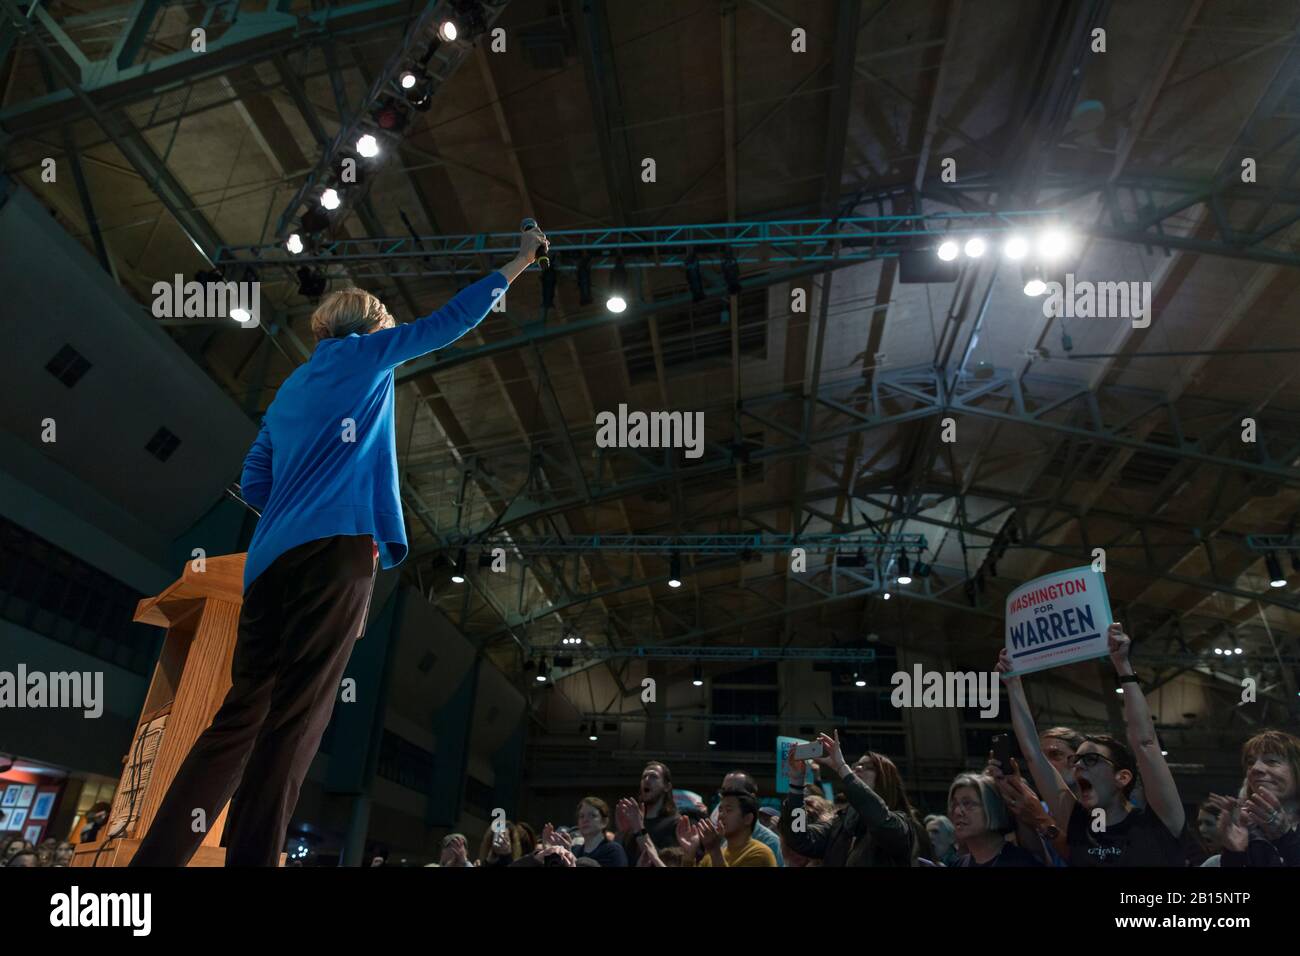 Senator Elizabeth Warren speaks to supporters during a town hall in Seattle, Washington on Saturday, February 22, 2020. Stock Photo